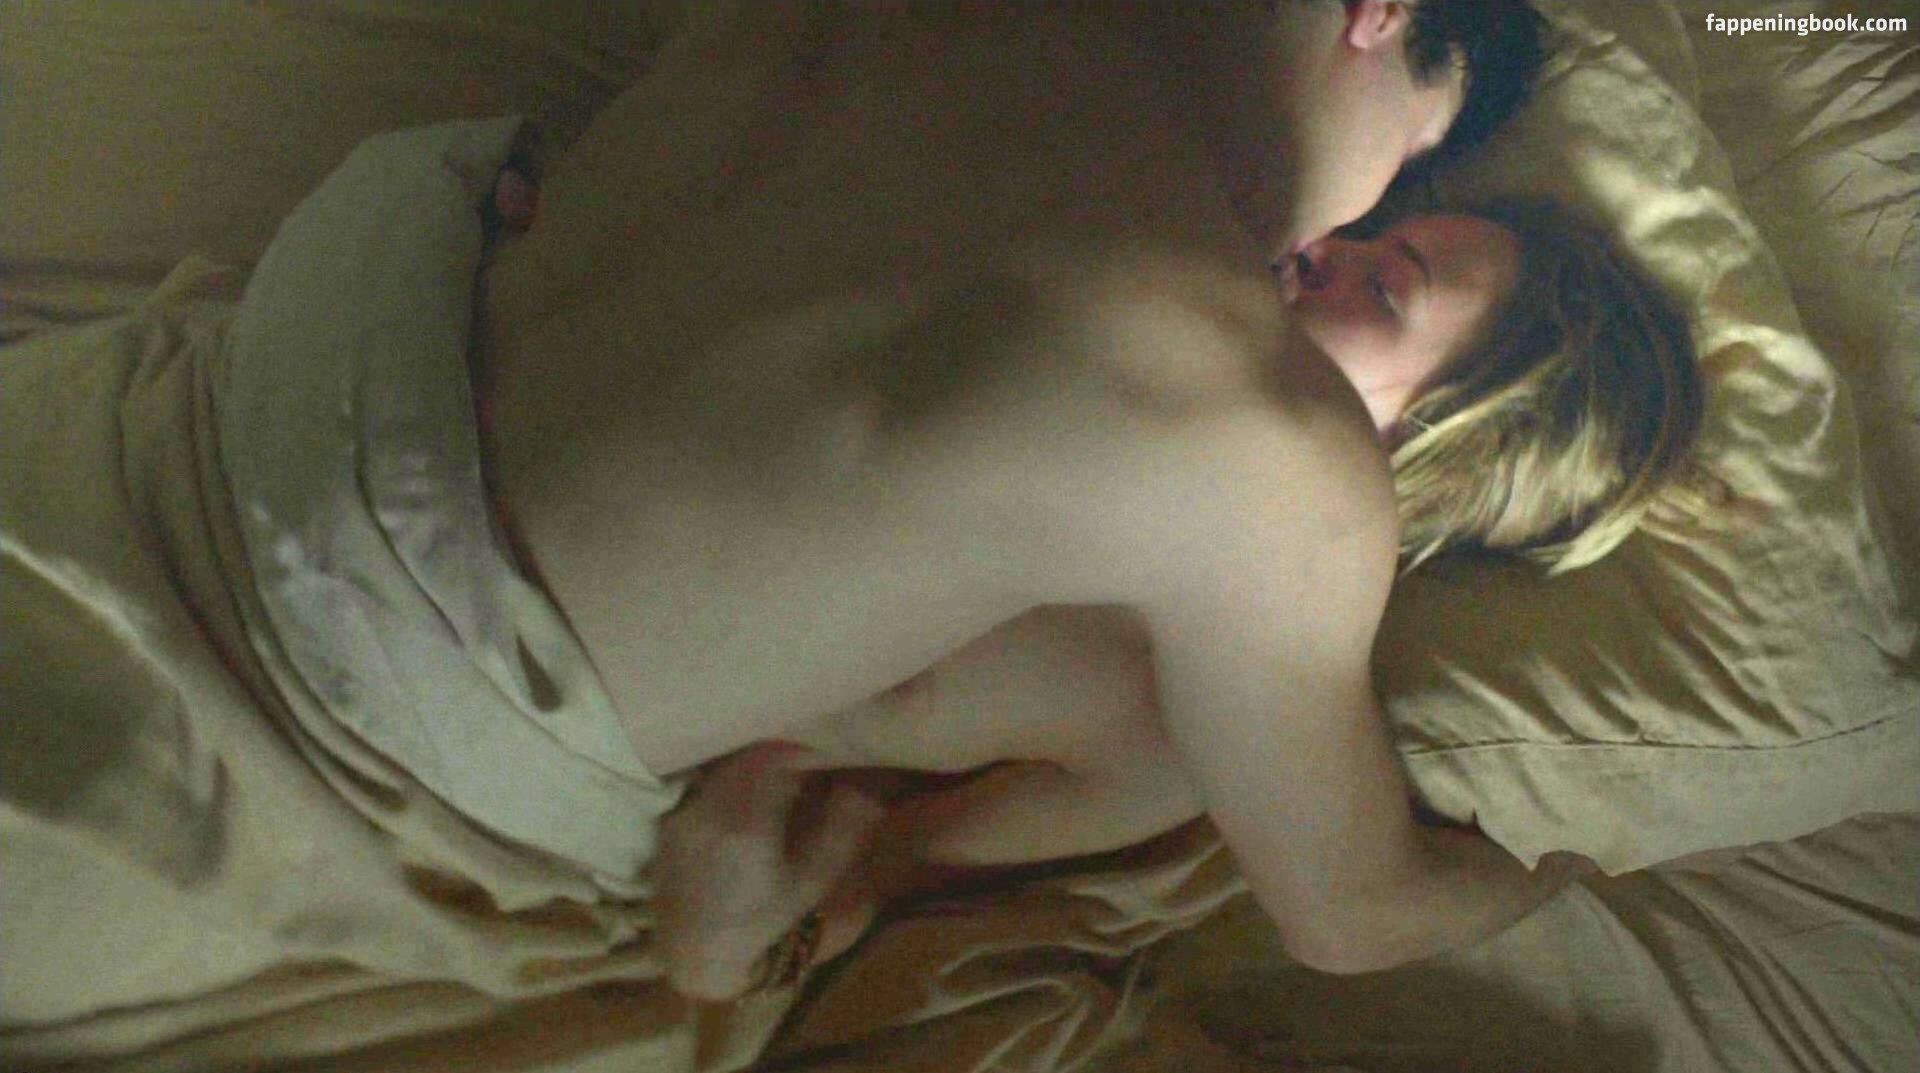 Britt Robertson Nude, The Fappening - Photo #89763 - FappeningBook.